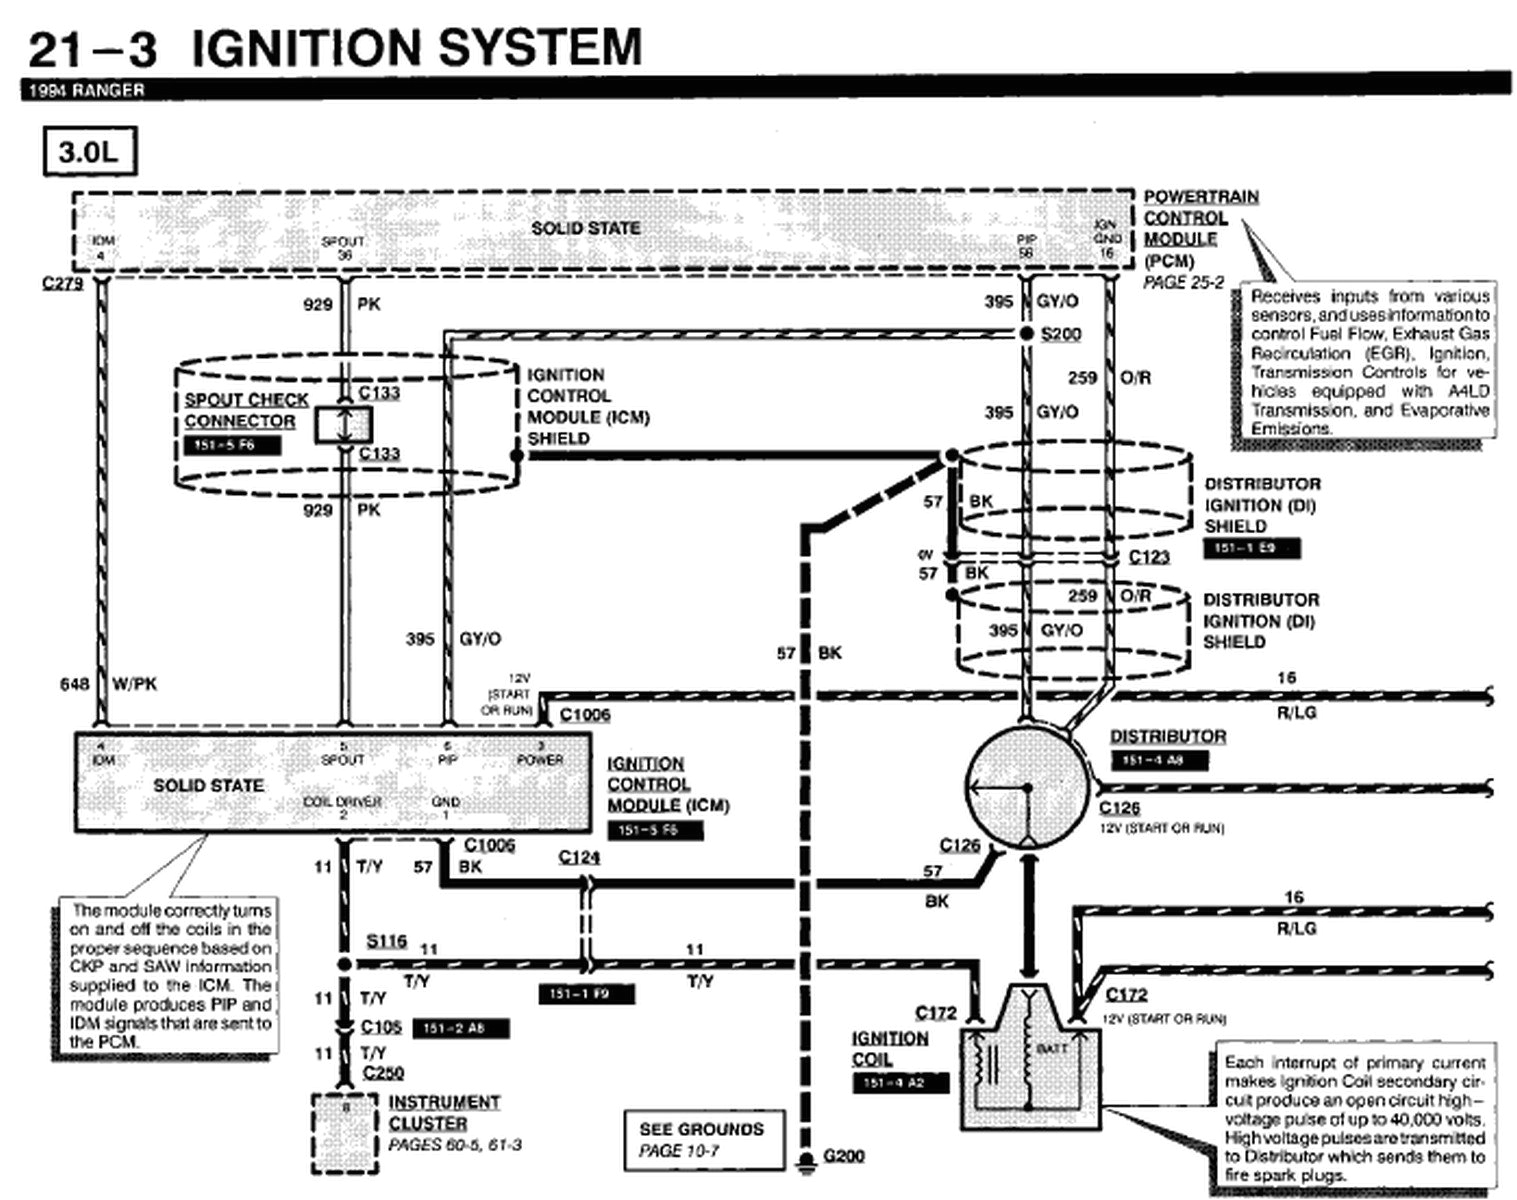 1994 ford Ranger Ignition Wiring Diagram 1994 ford Ranger I Locate A Diagram for the Electrical